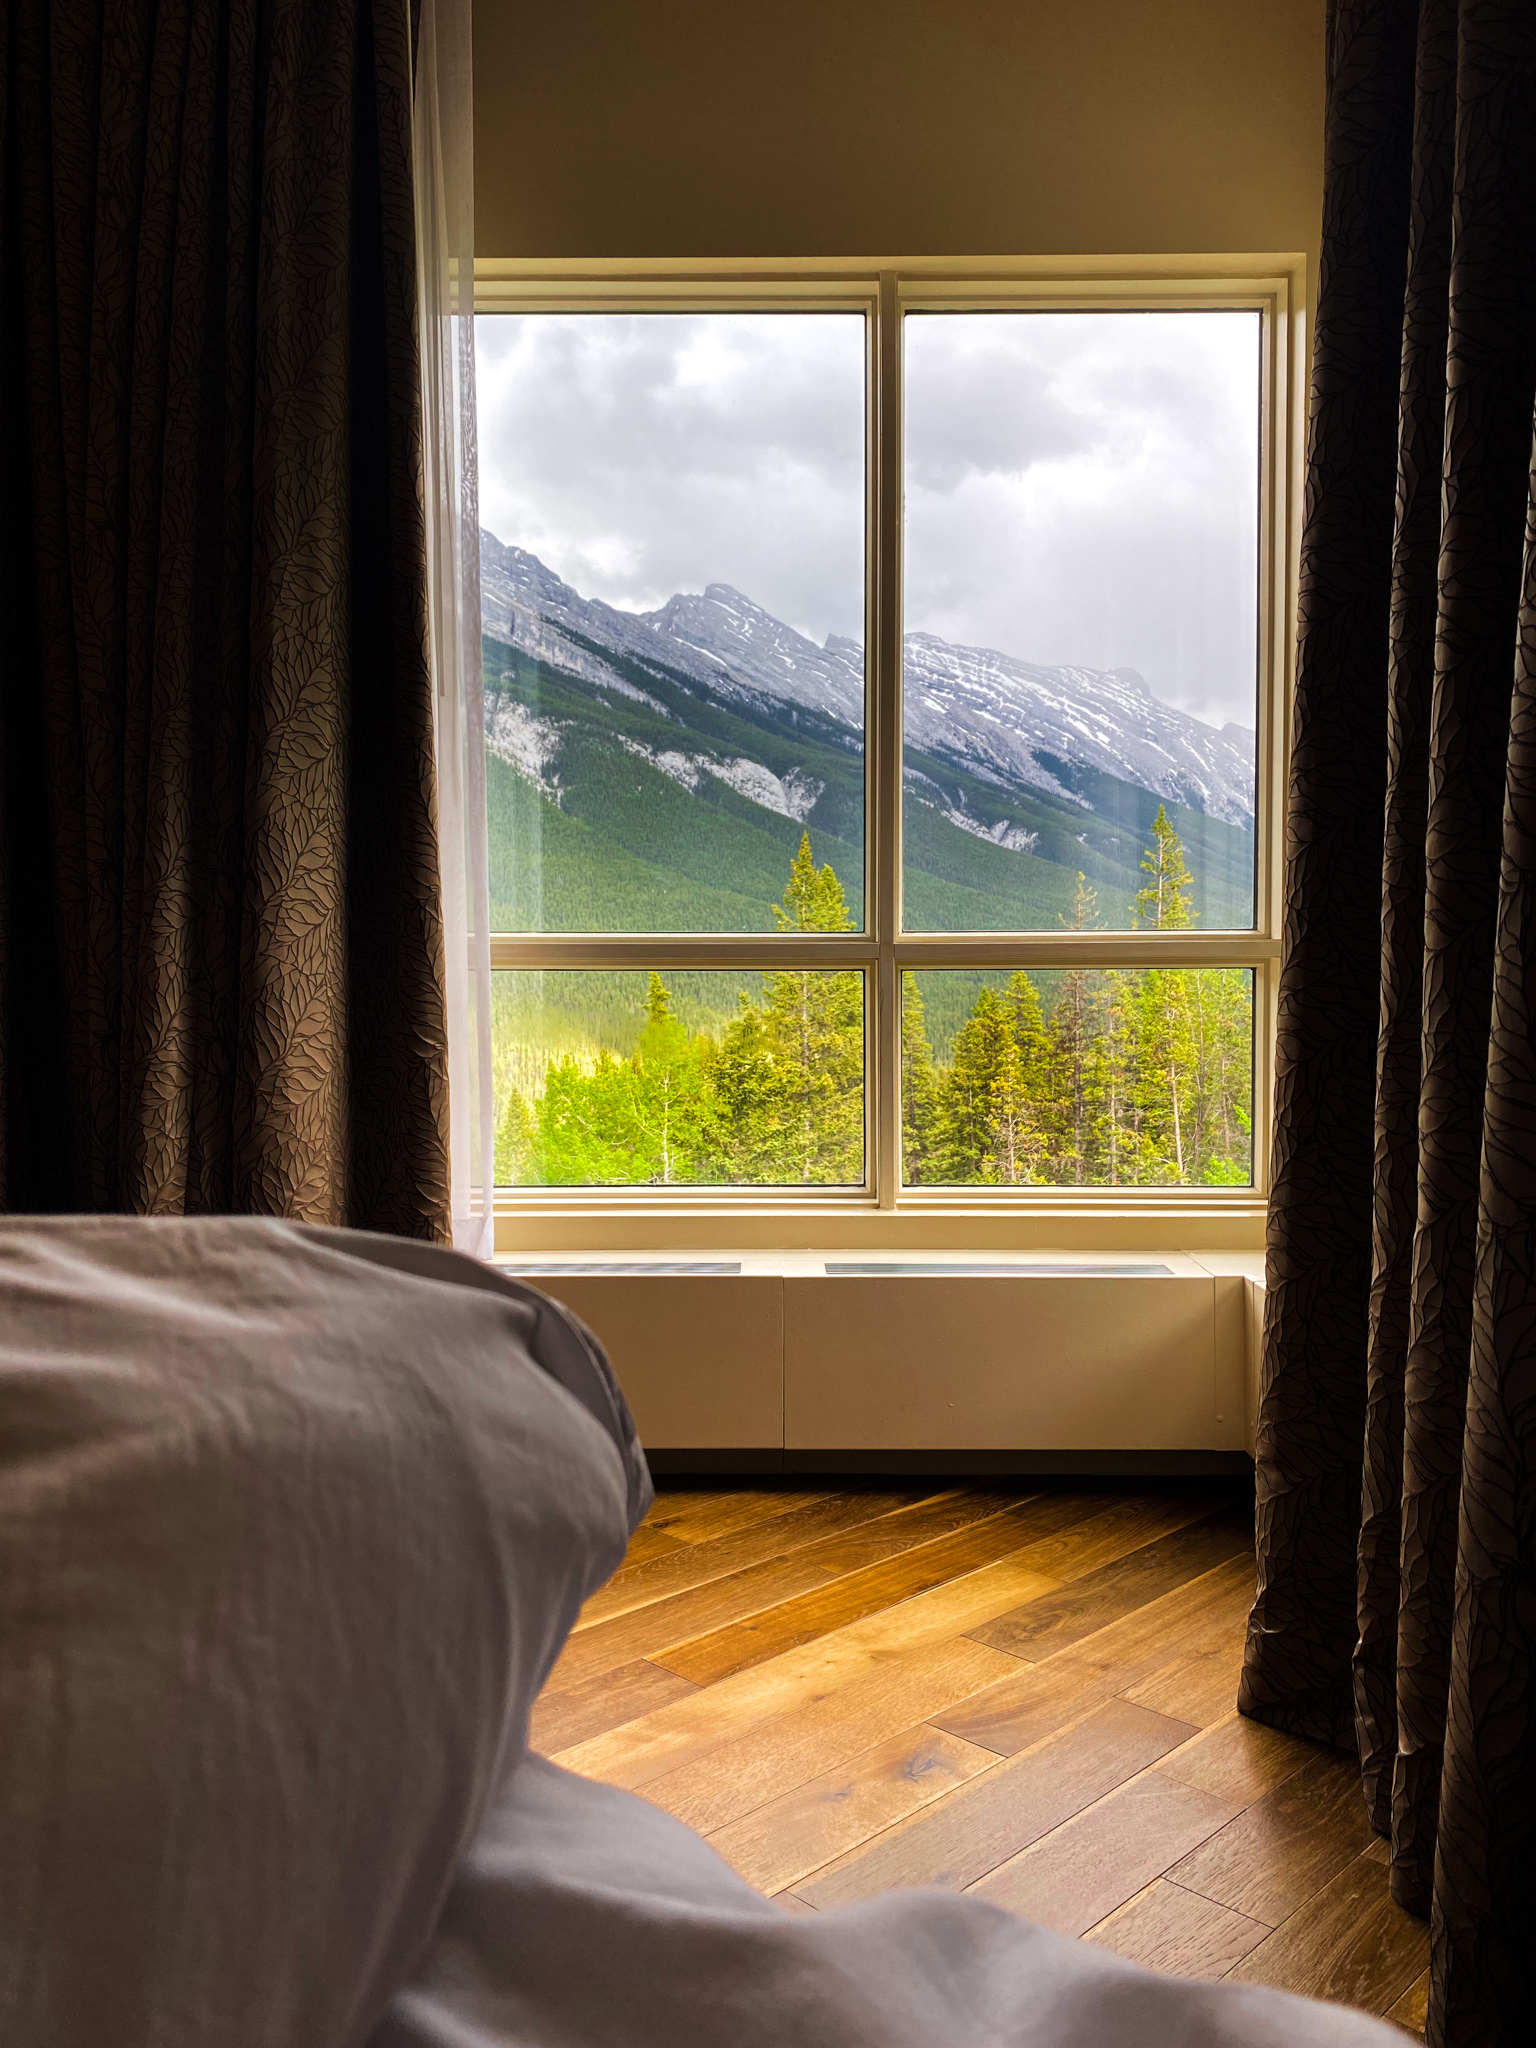 Enjoying the views of Mount Rundle from the comfort of our King bed at the rimrock